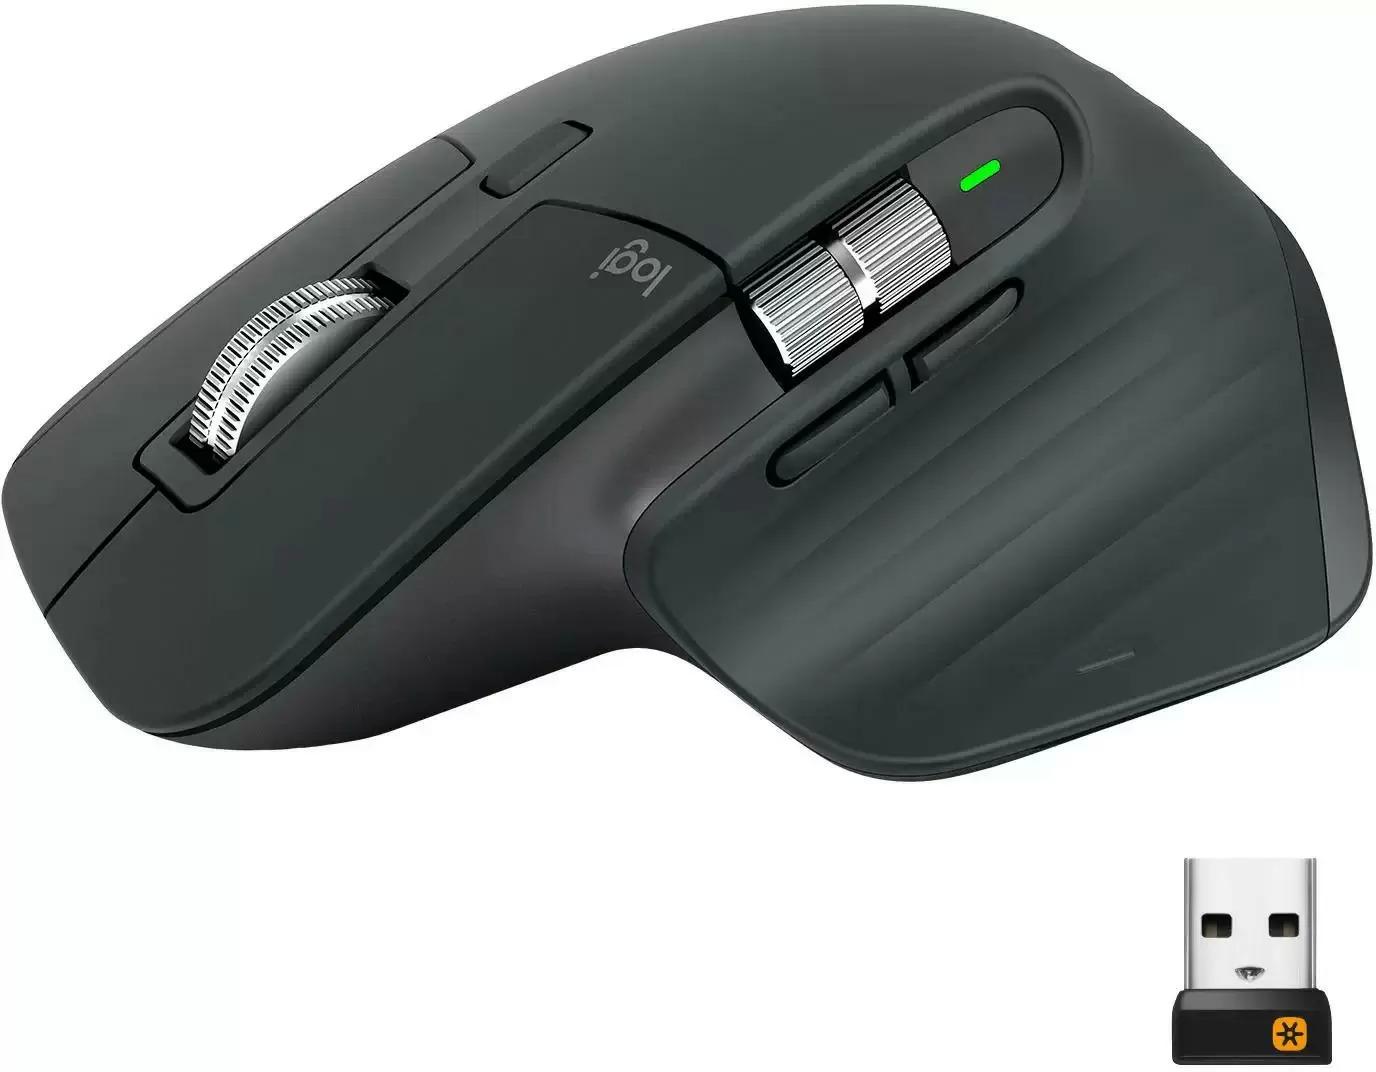 Logitech MX Master 3 Wireless Mouse with Receiver for $64.99 Shipped